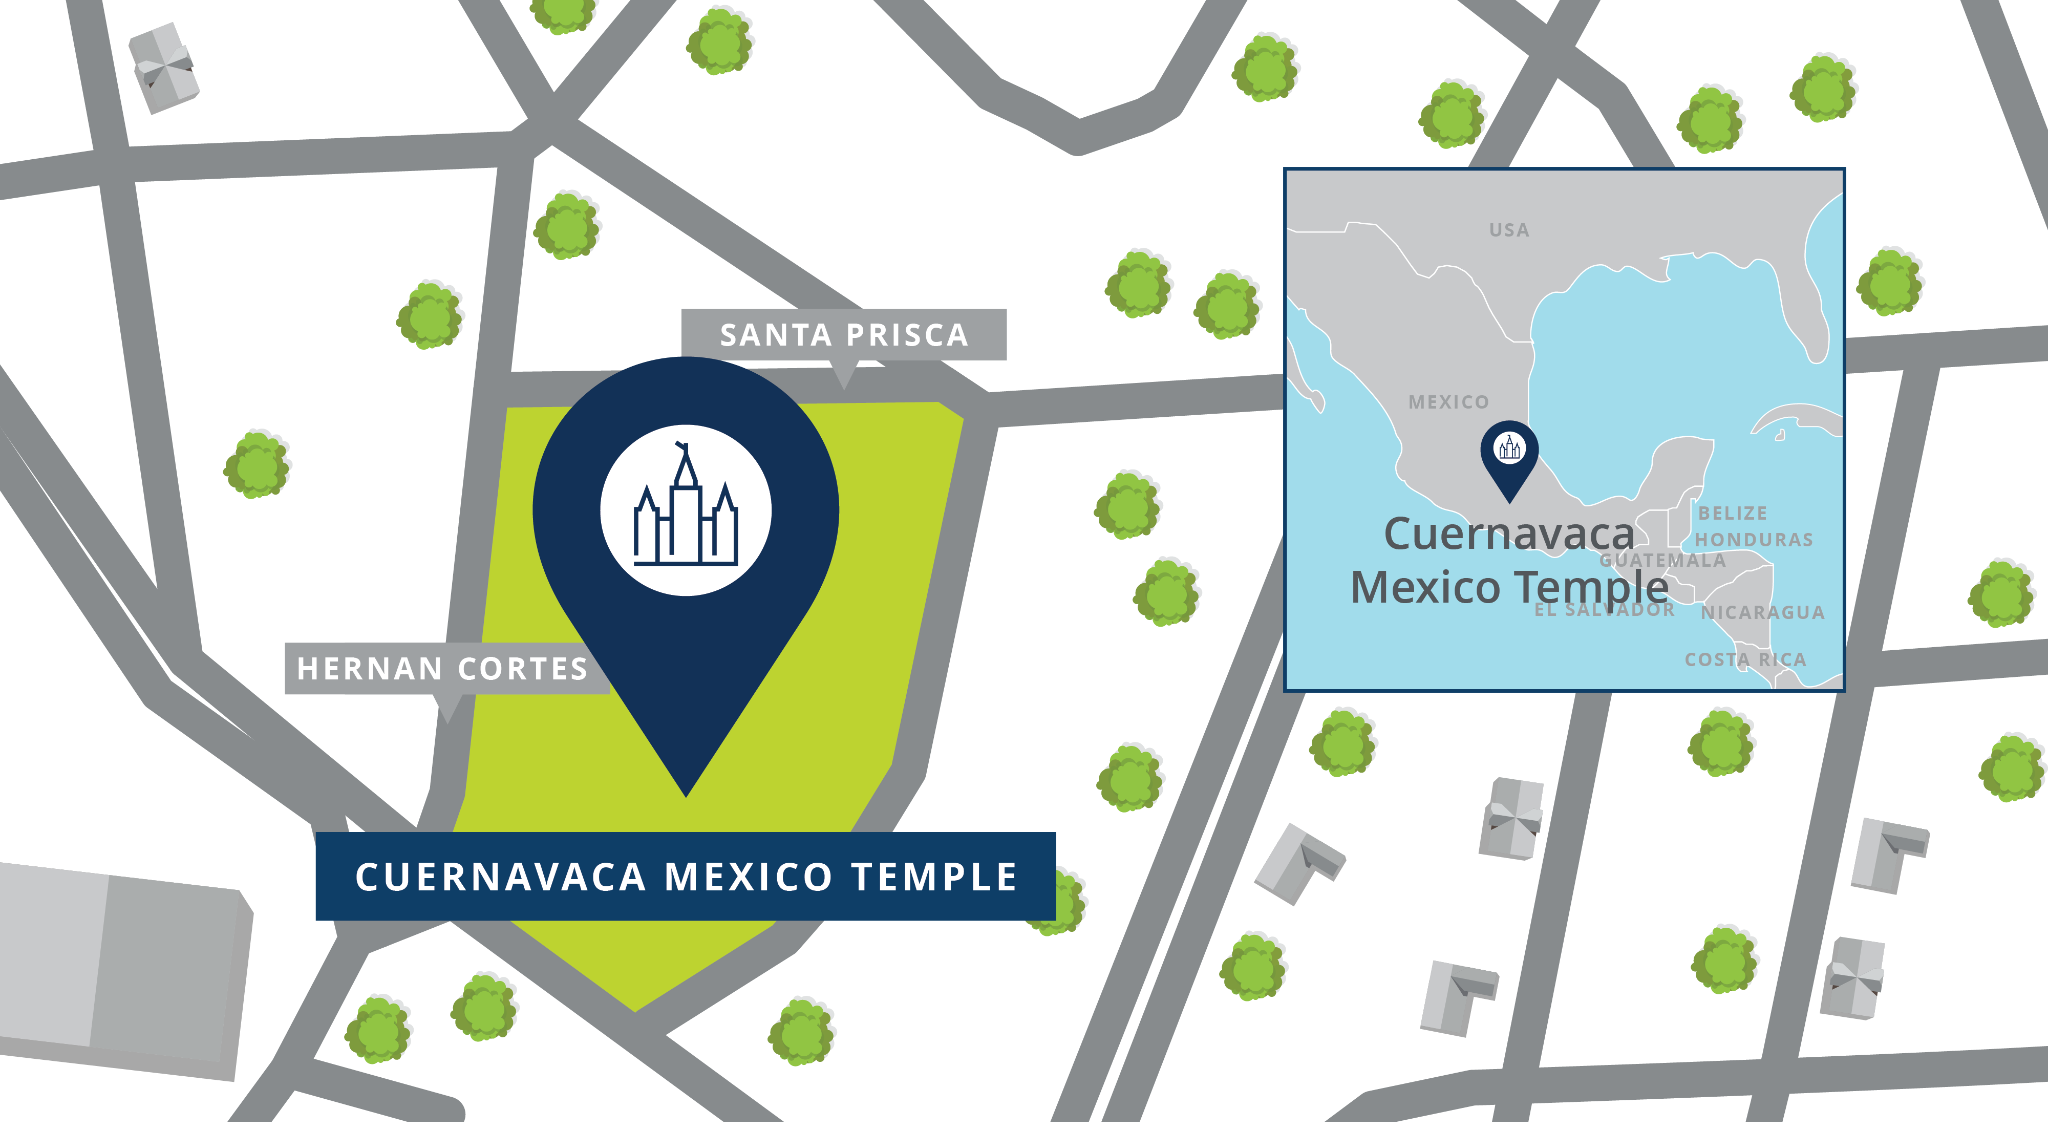 A map with a pin showing the location of the Cuernavaca Mexico Temple site, with nearby roads.